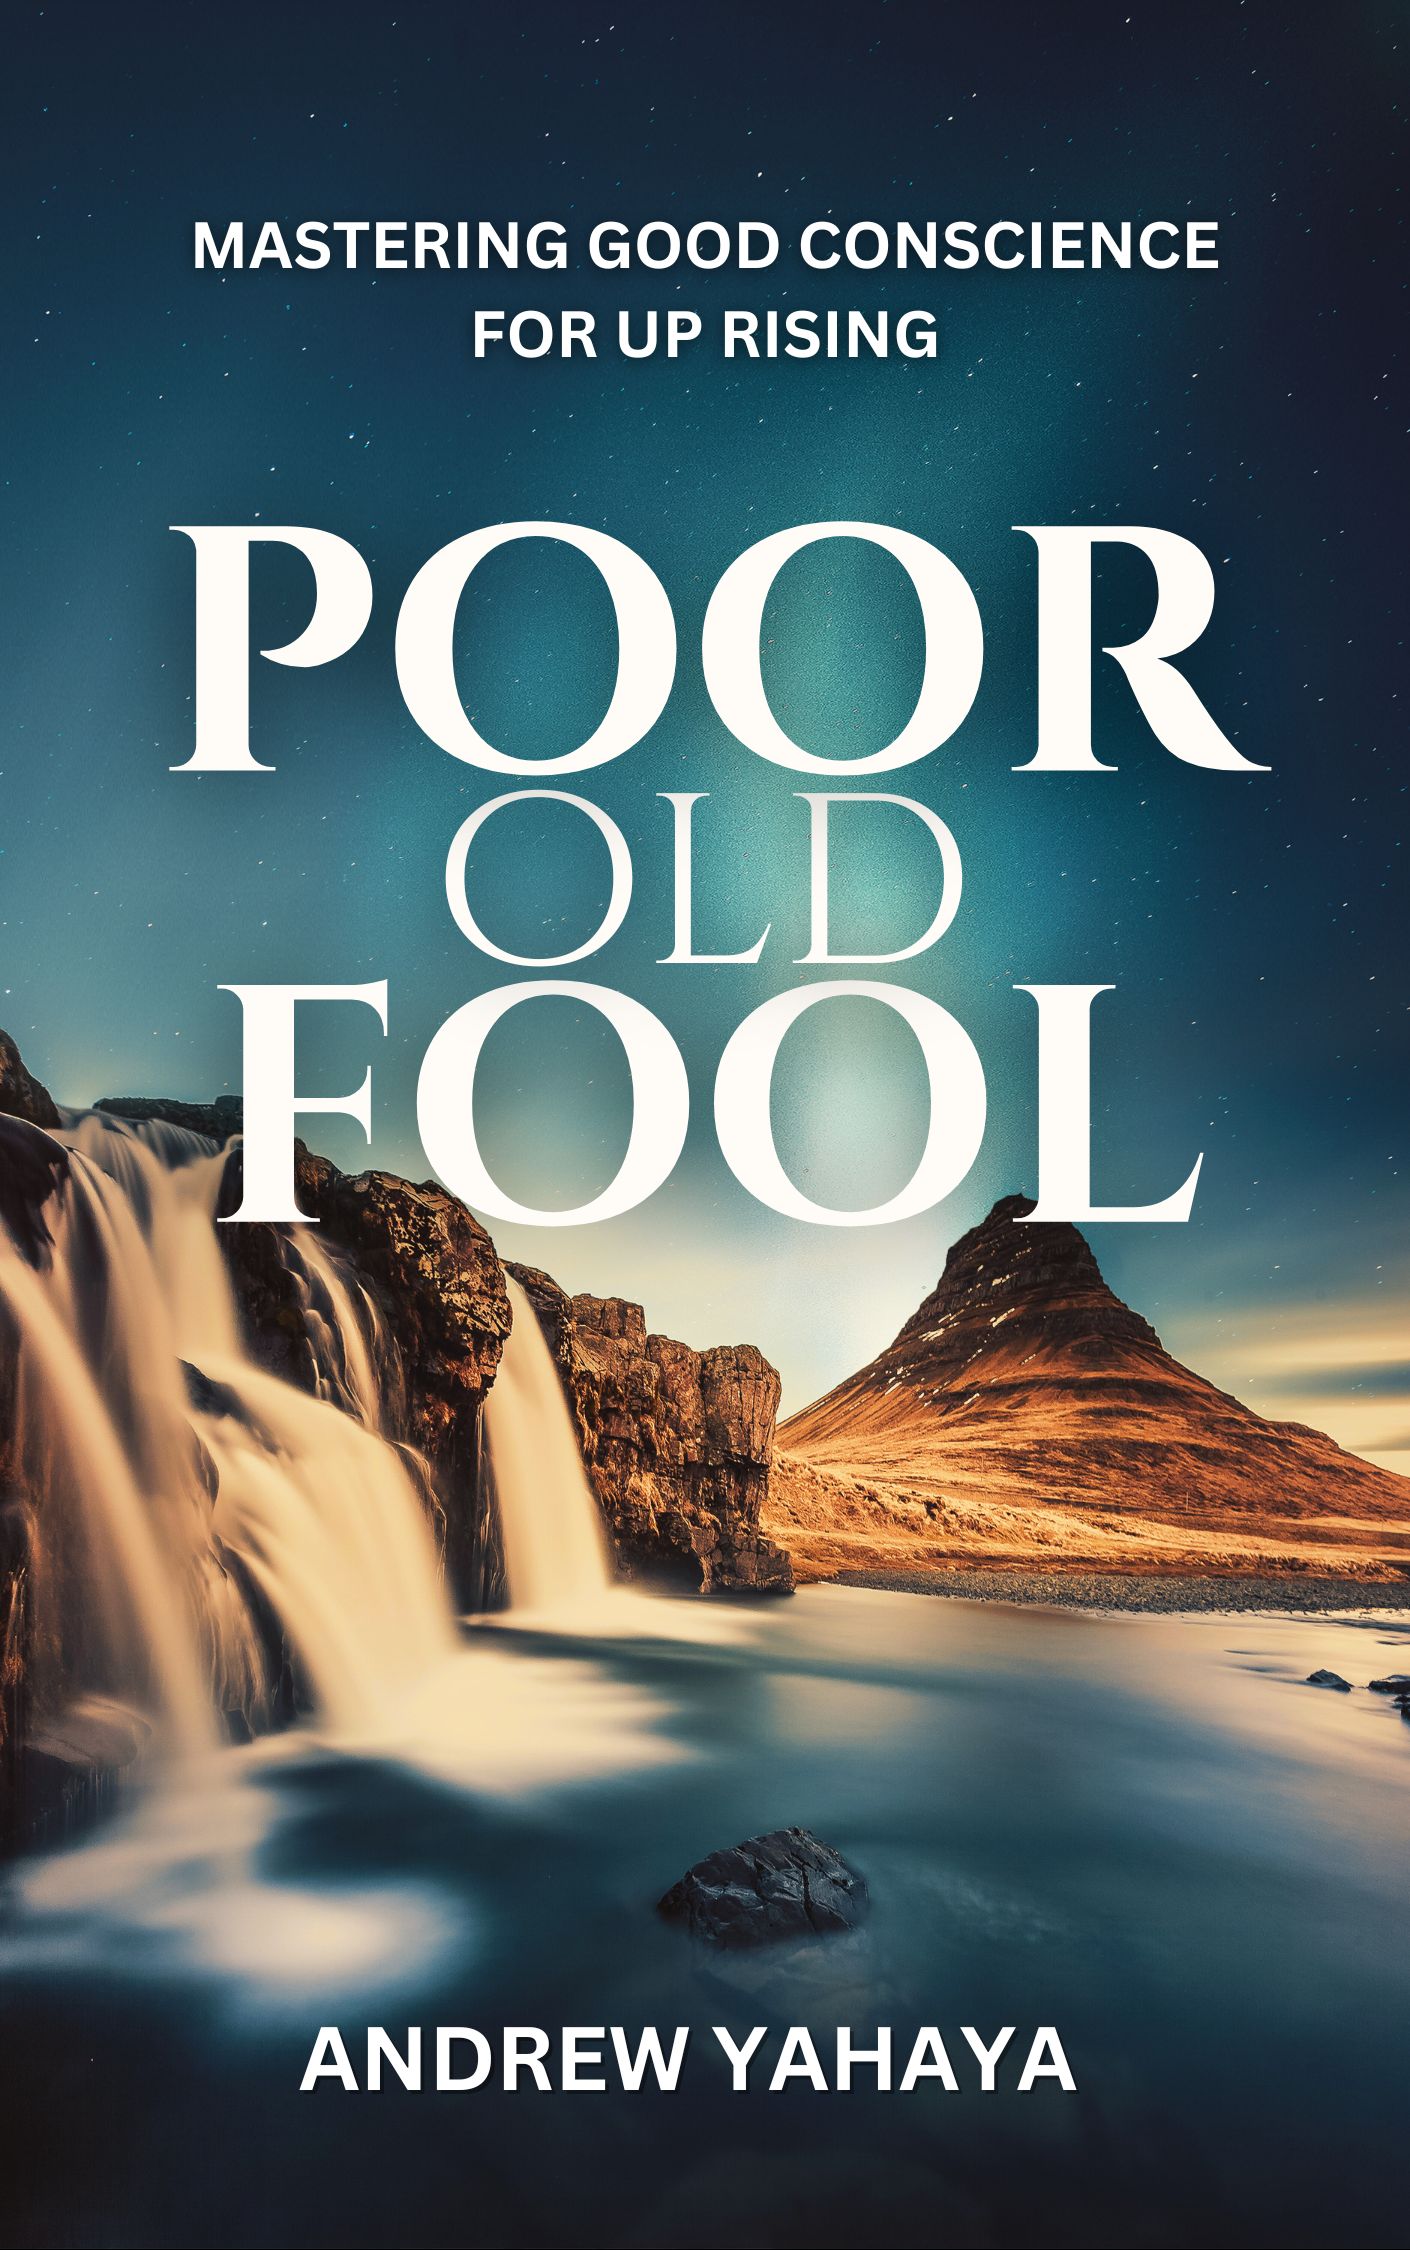 Poor-Old-Fool--Mastering-Good-Conscience-For-Up-Rising